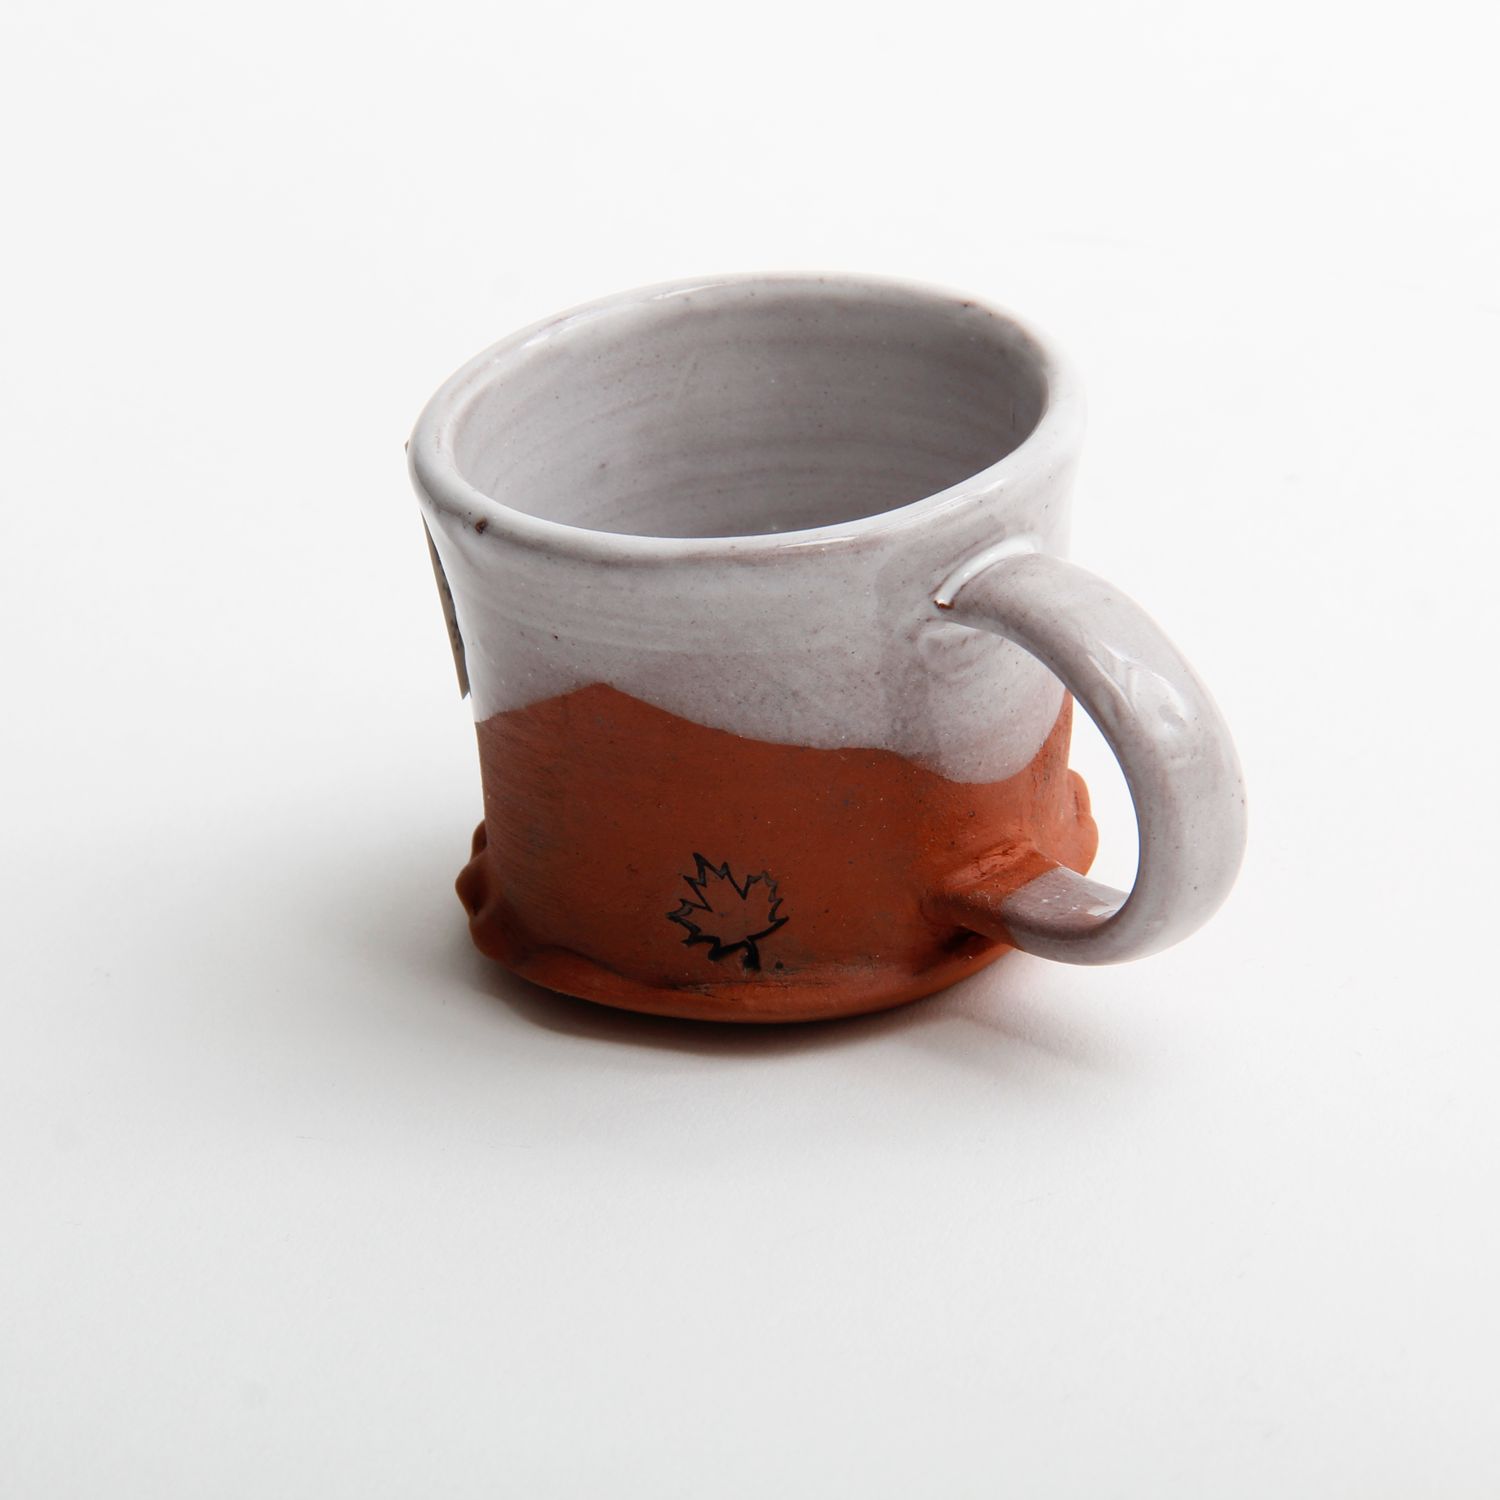 Mary McKenzie: Espresso Cup White Product Image 2 of 2